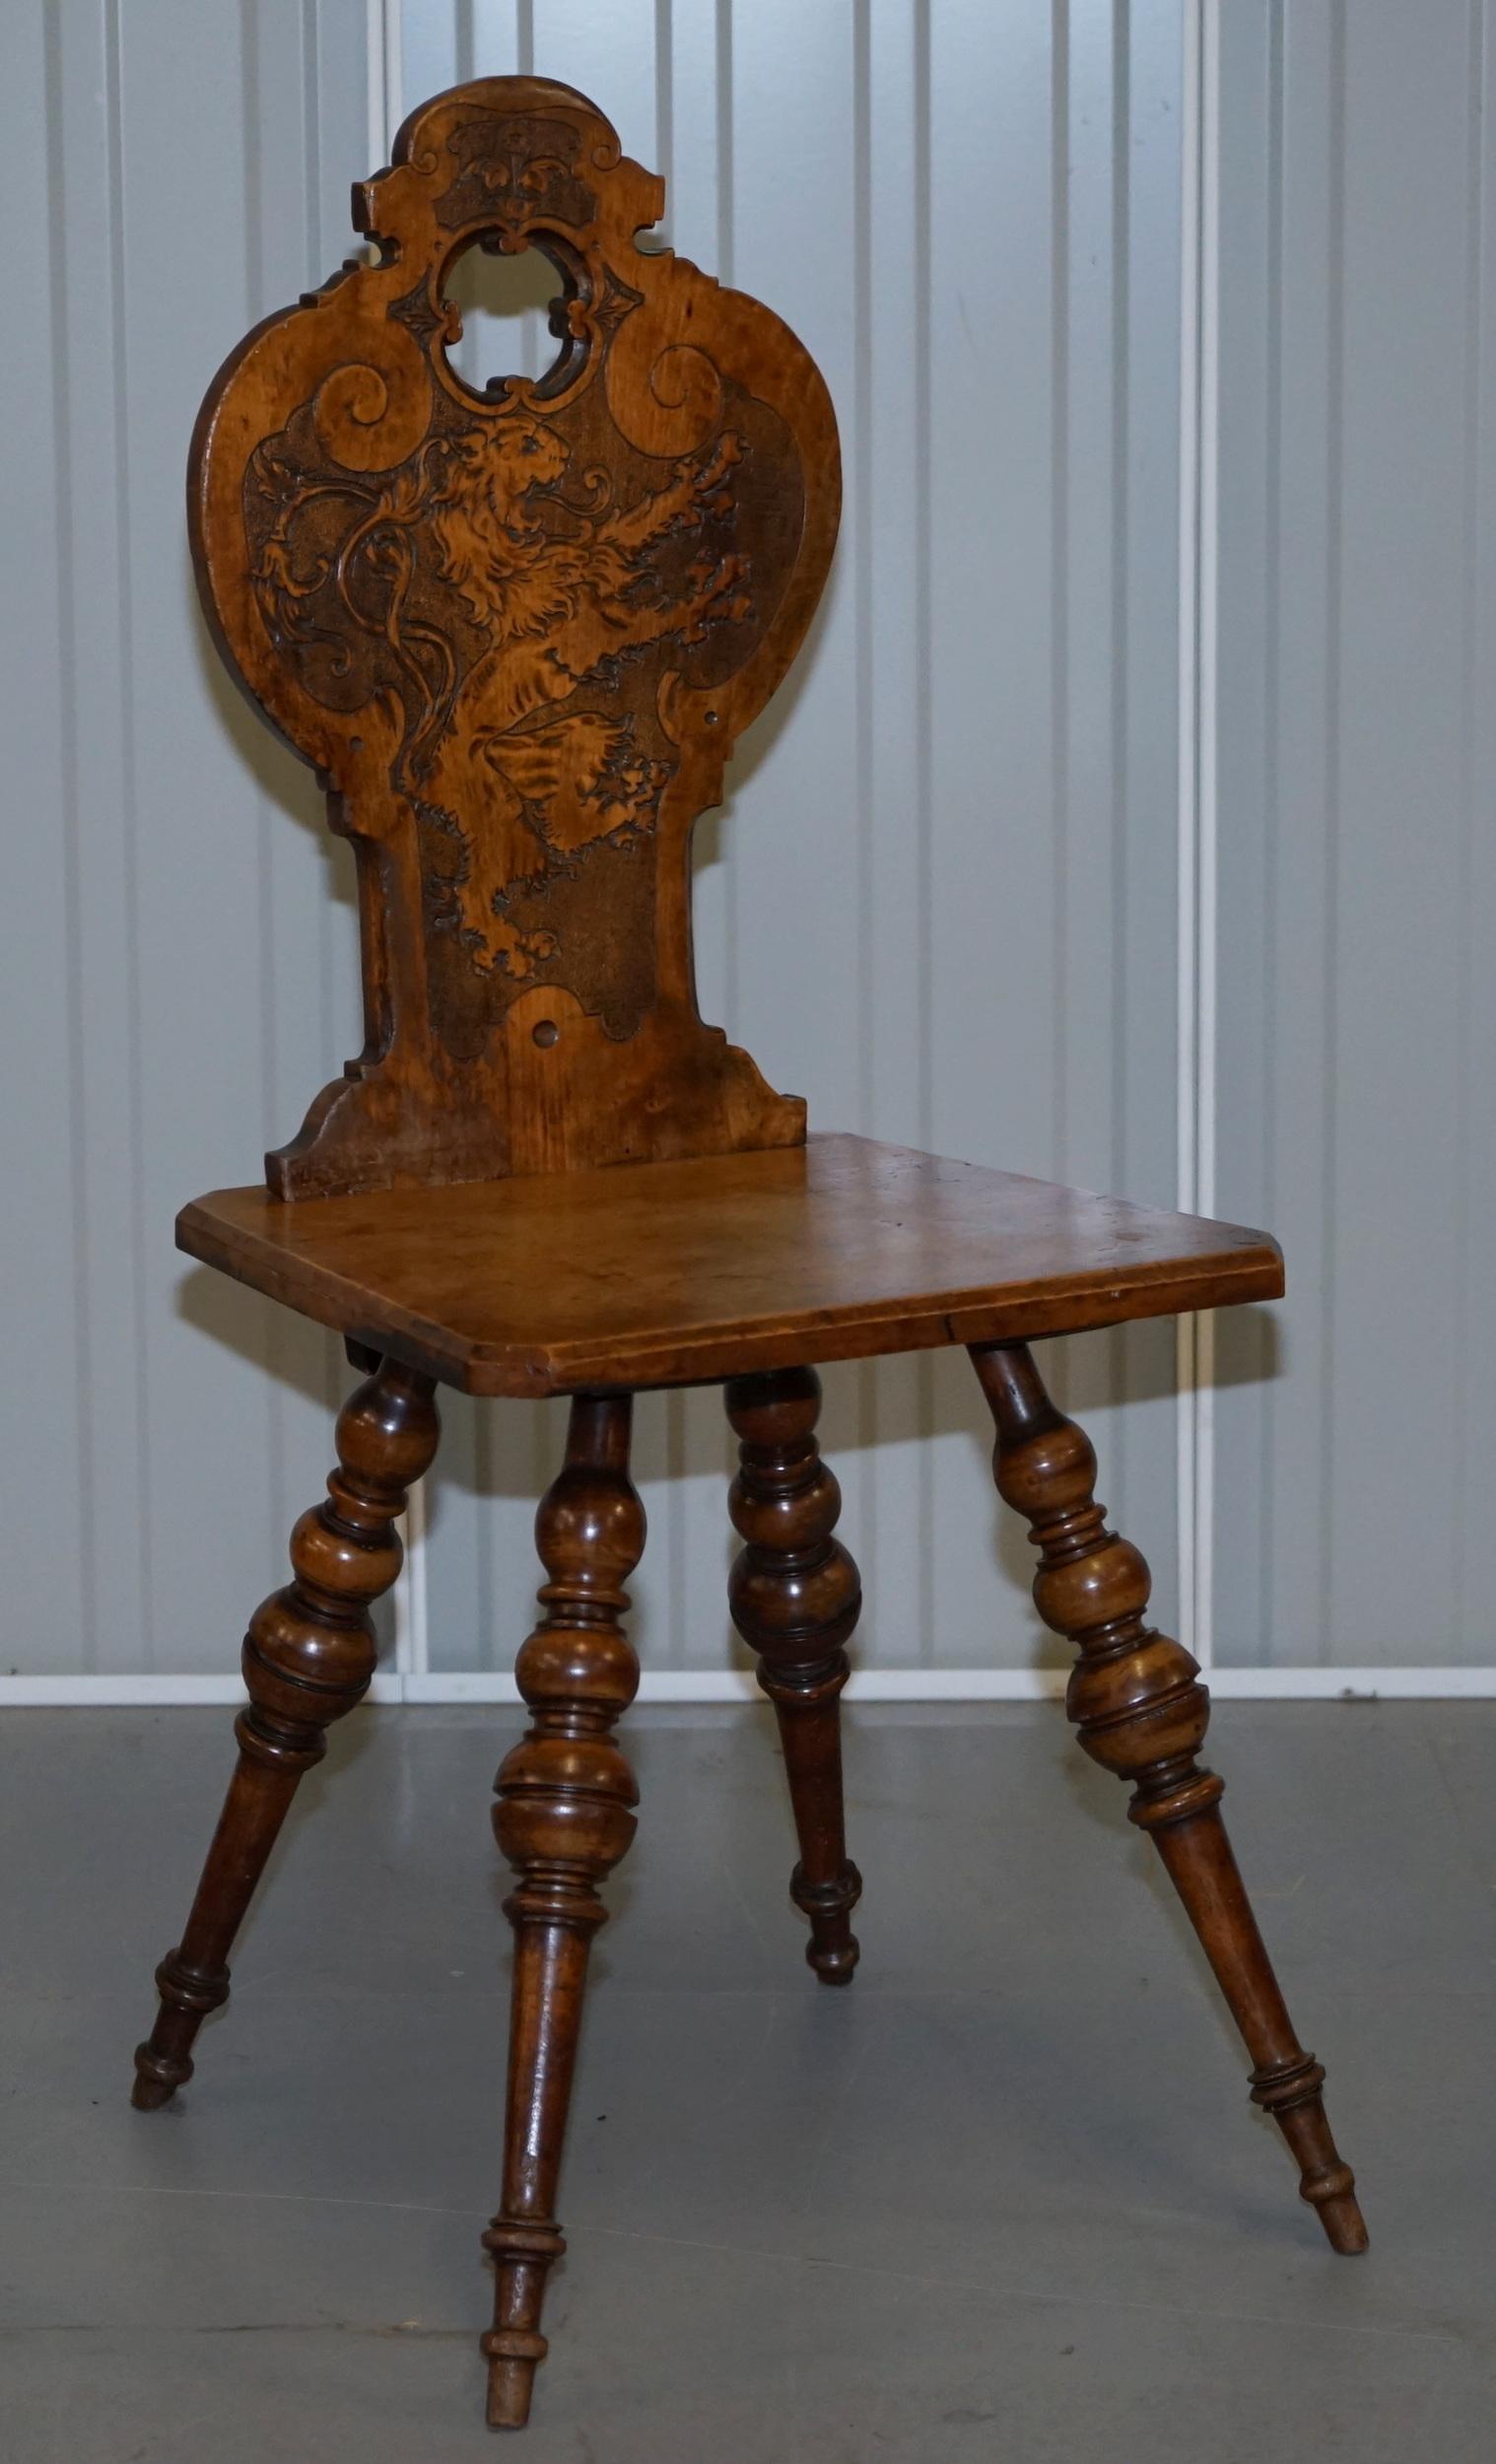 We are delighted to offer for sale this stunning pair of original Victorian Poker work hall chairs depicting Regency Armorial Crested Lions

A very good looking well made and decorative pair of chairs, they have some original finish left in the